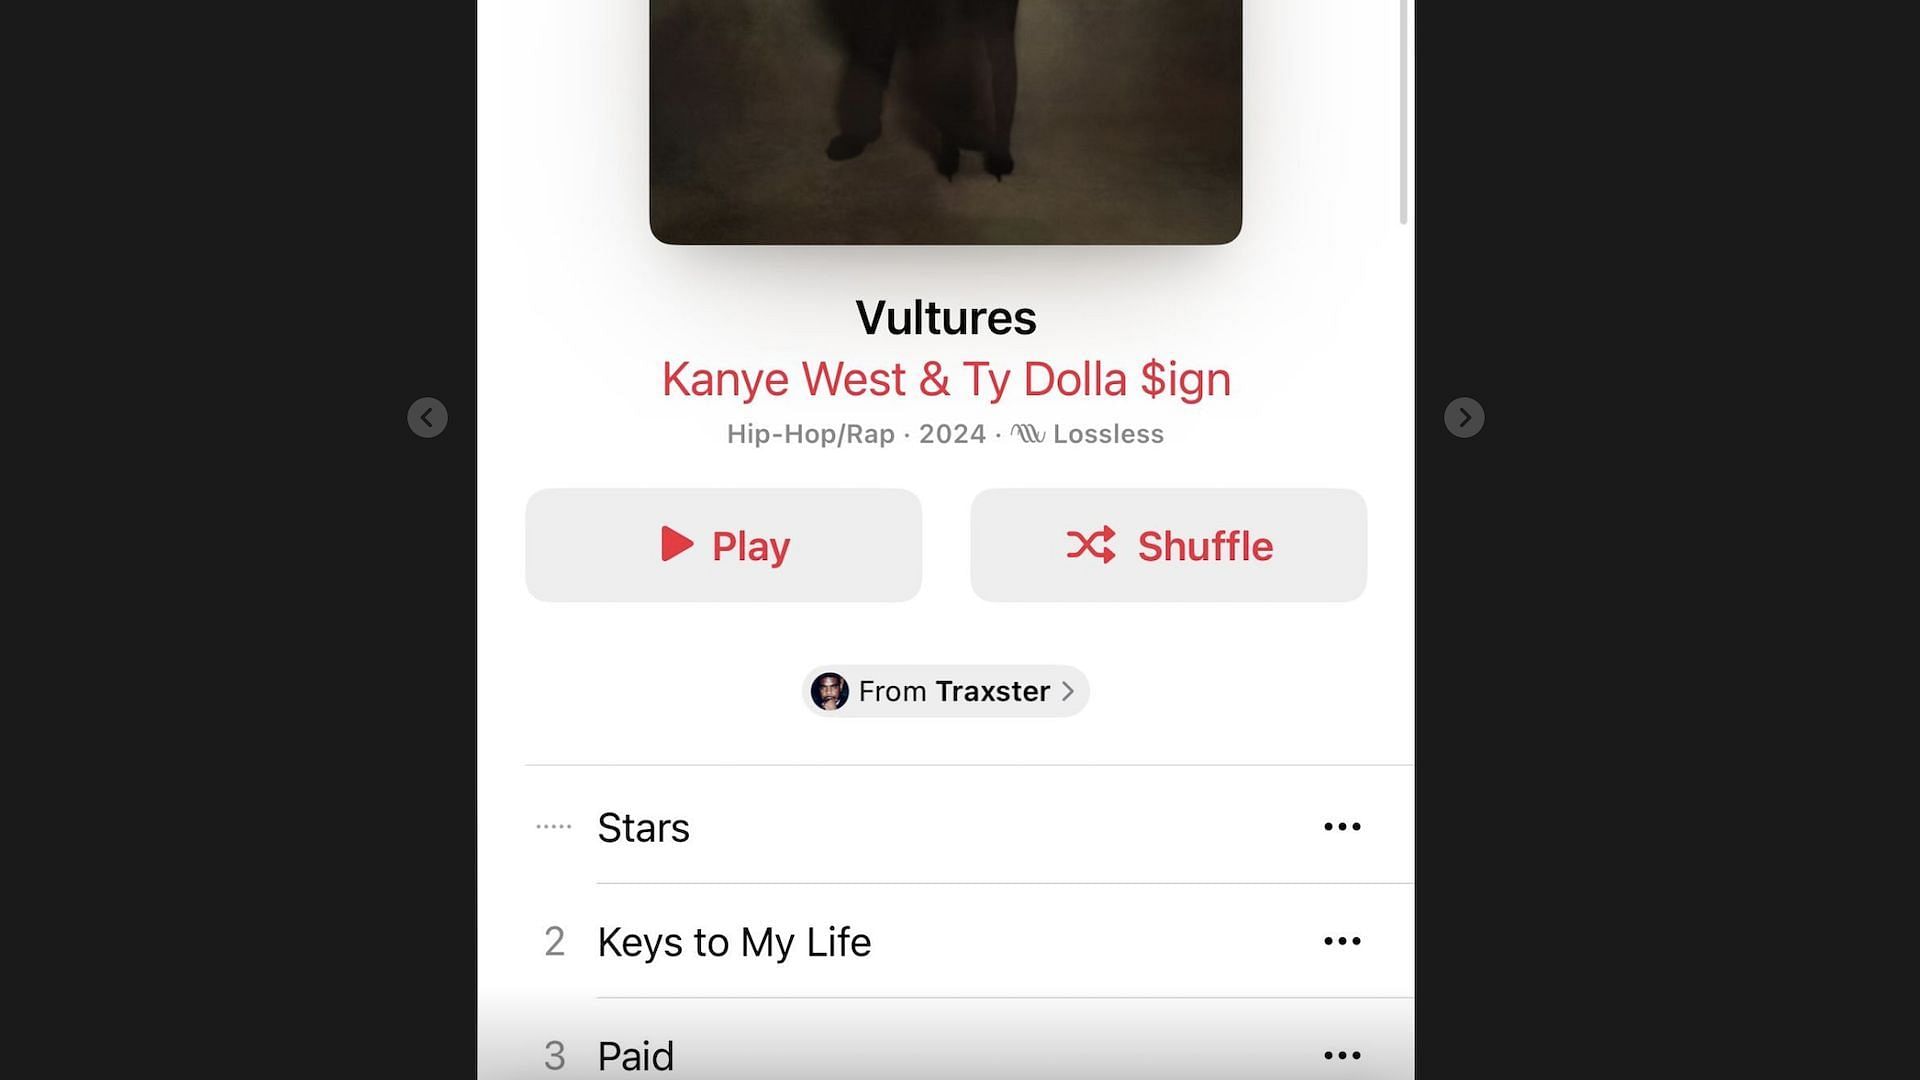 A story posted by Ye confirming Vultures by Kanye West and Ty Dolla $ign is officially out now on Apple Music (Image via kanyewest/Instagram)